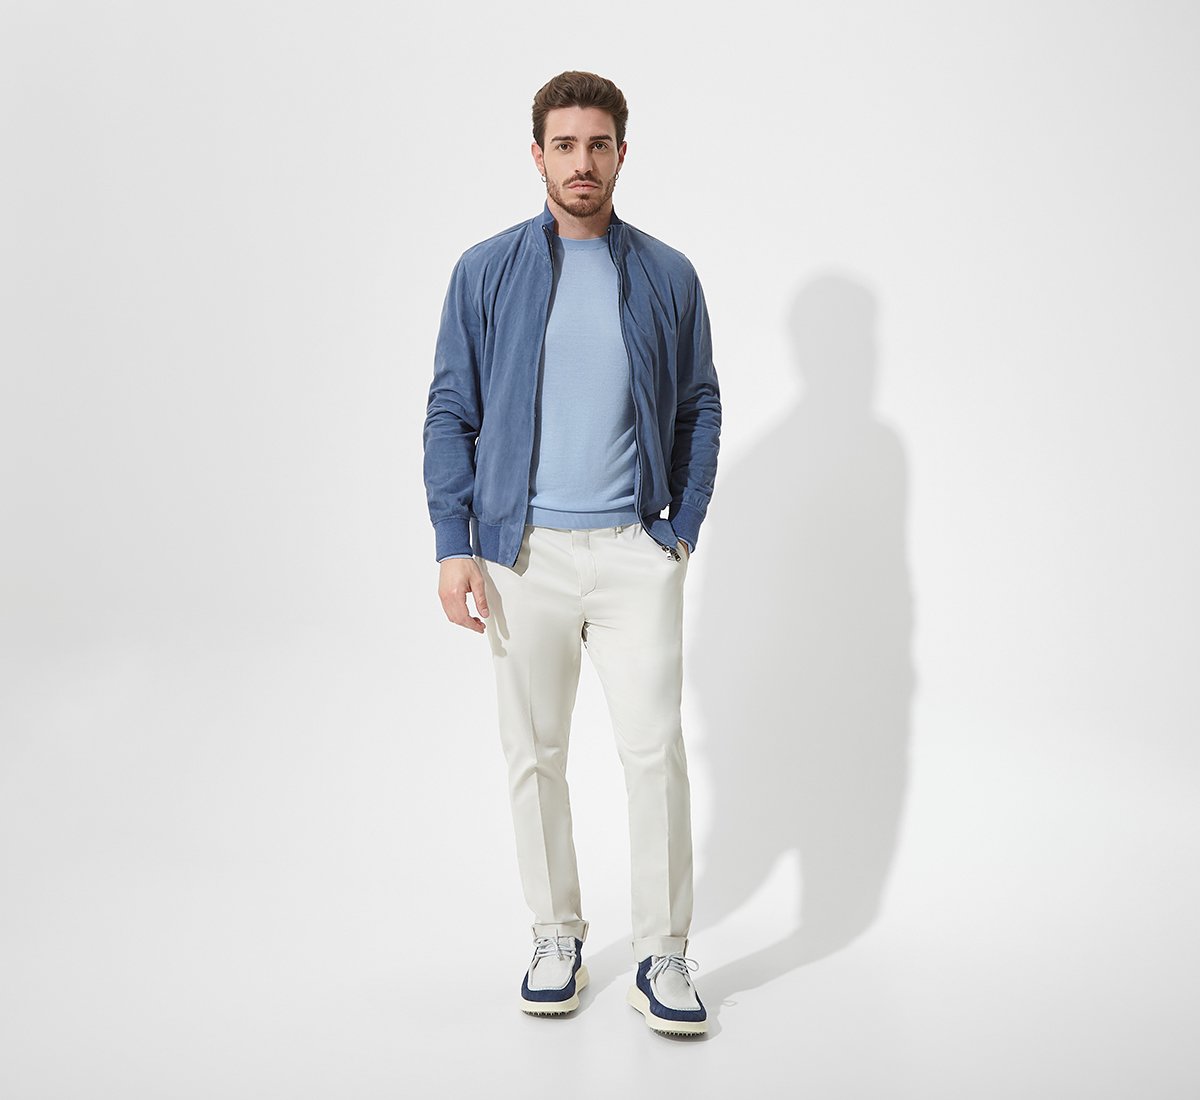 Regular fit white trousers